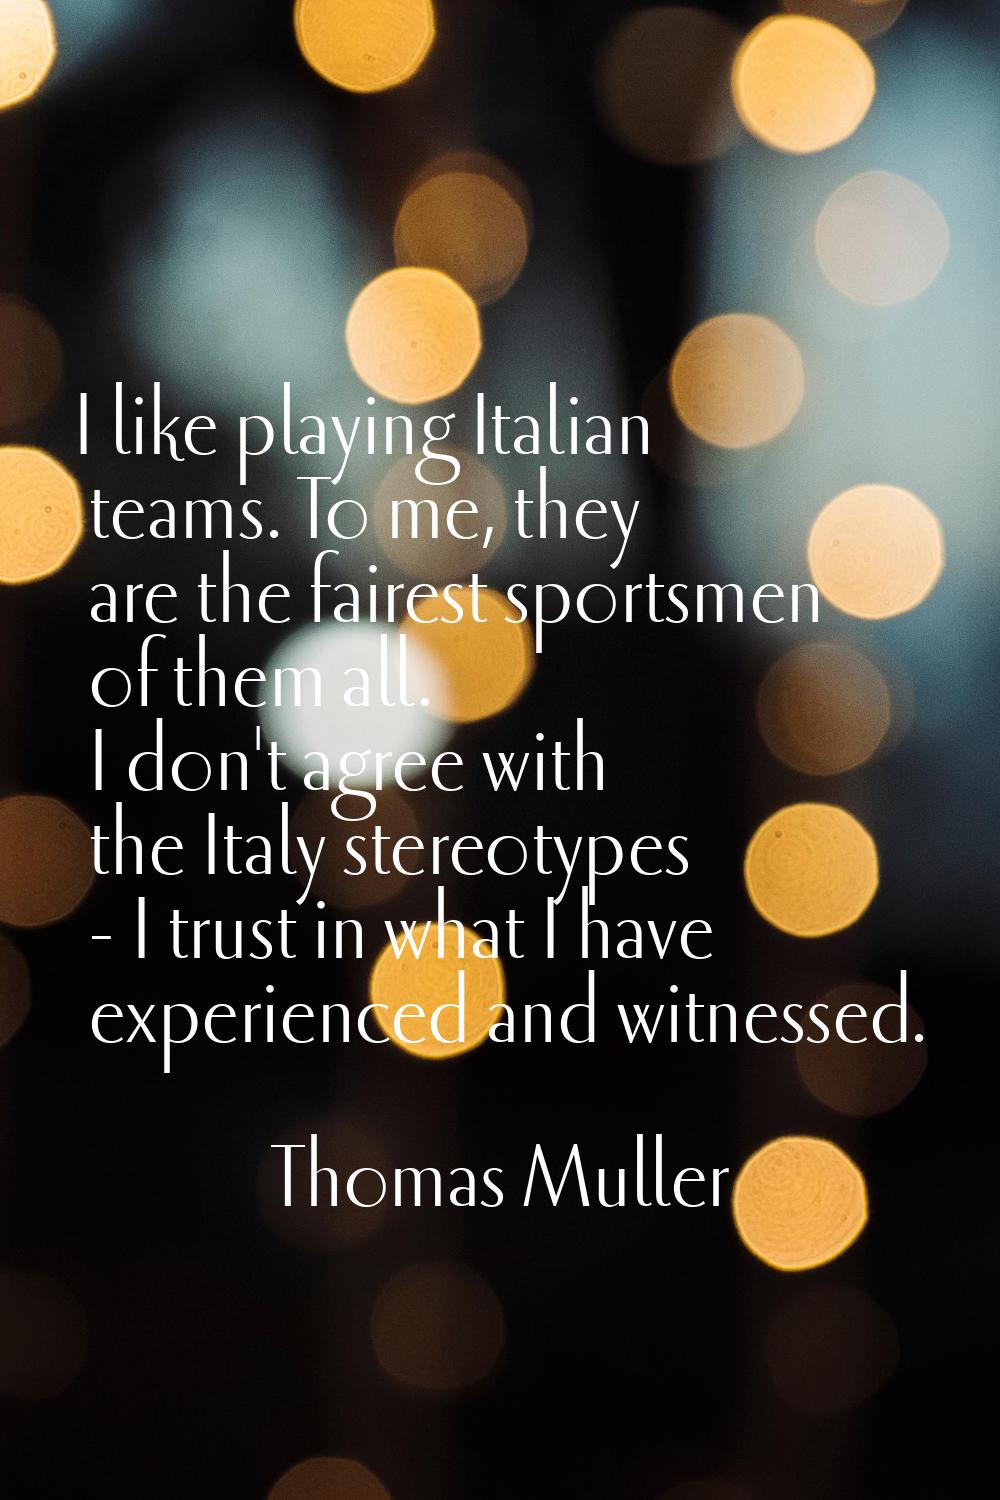 I like playing Italian teams. To me, they are the fairest sportsmen of them all. I don't agree with